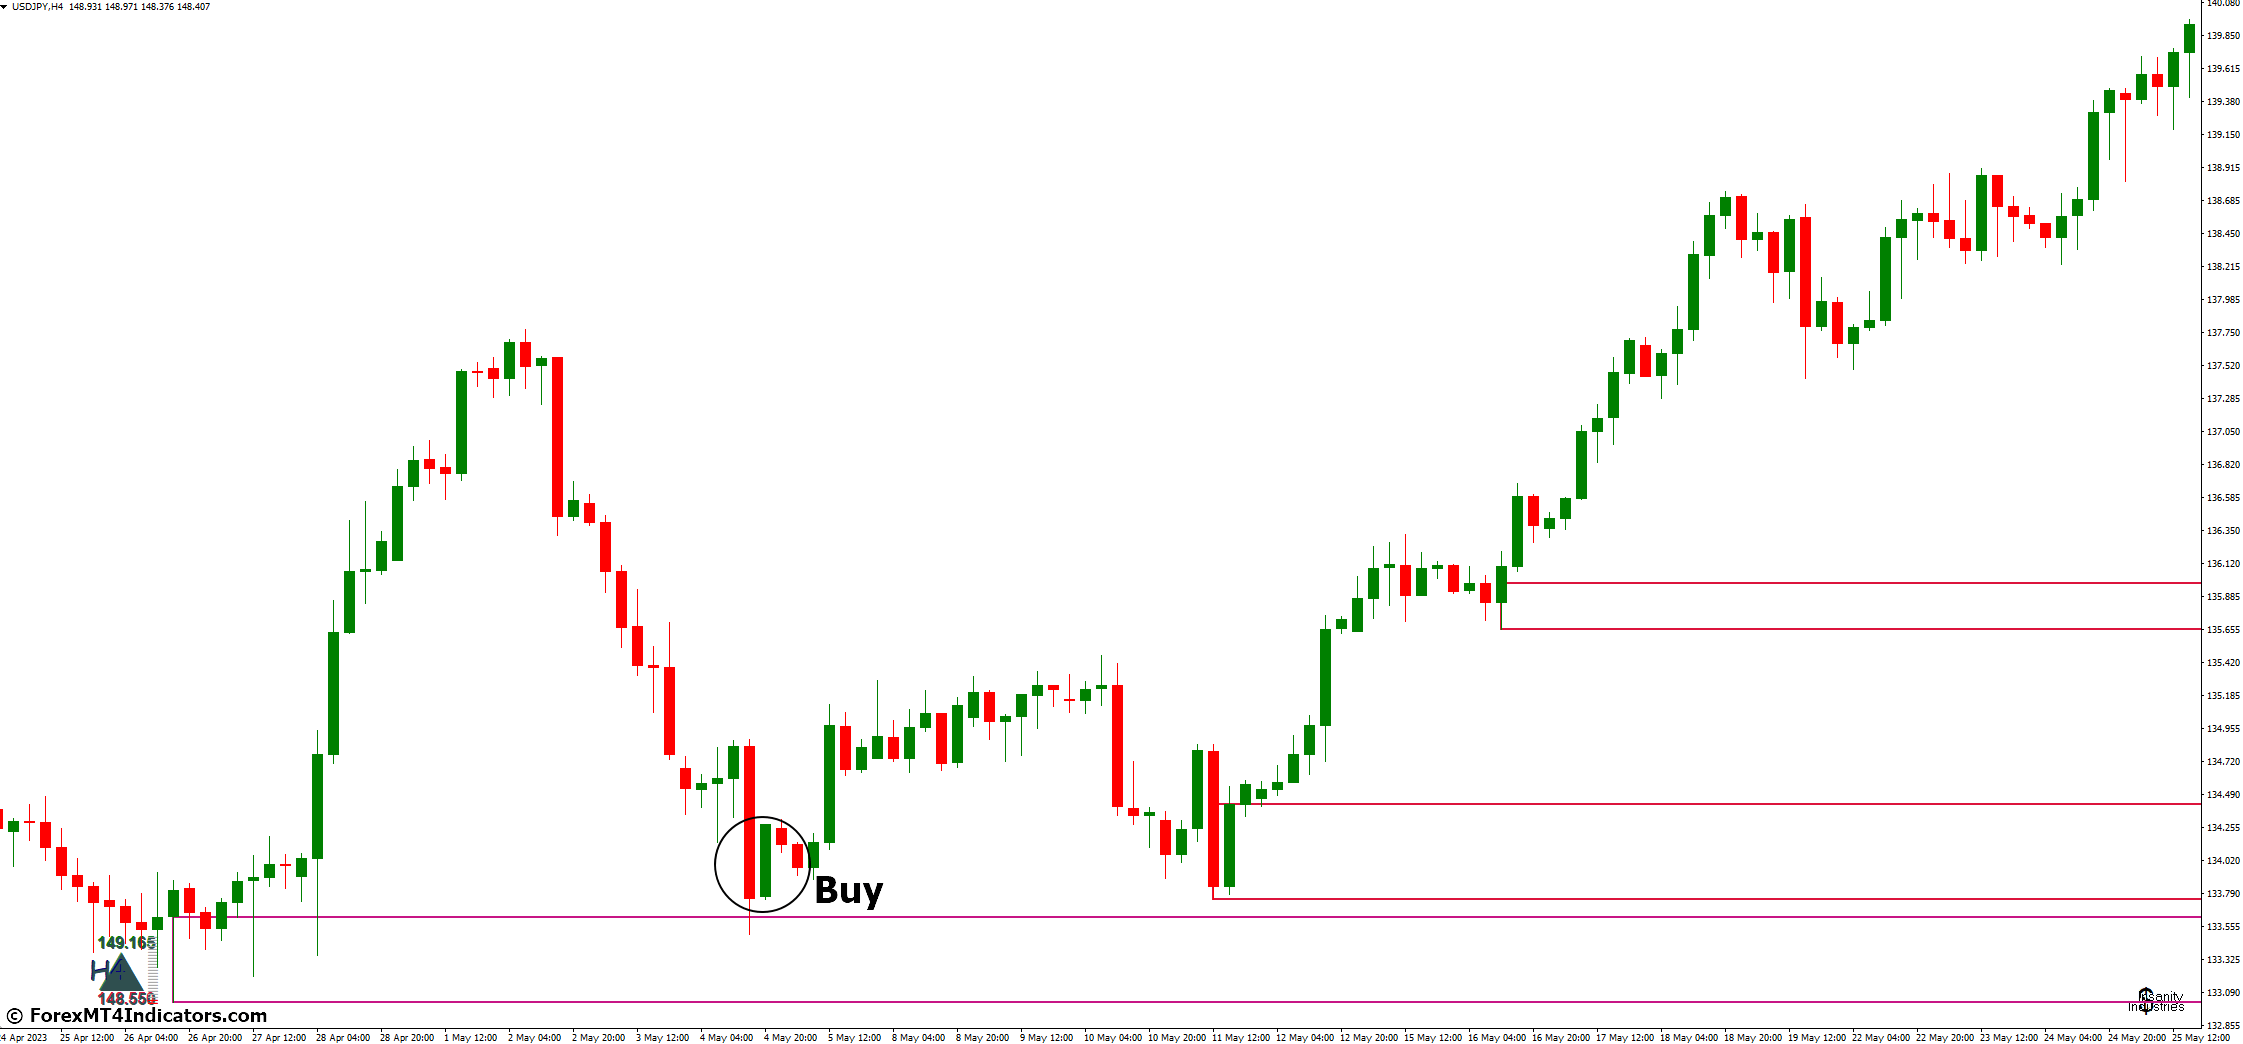 How to Trade with II SupDem MT4 Indicator - Buy Entry